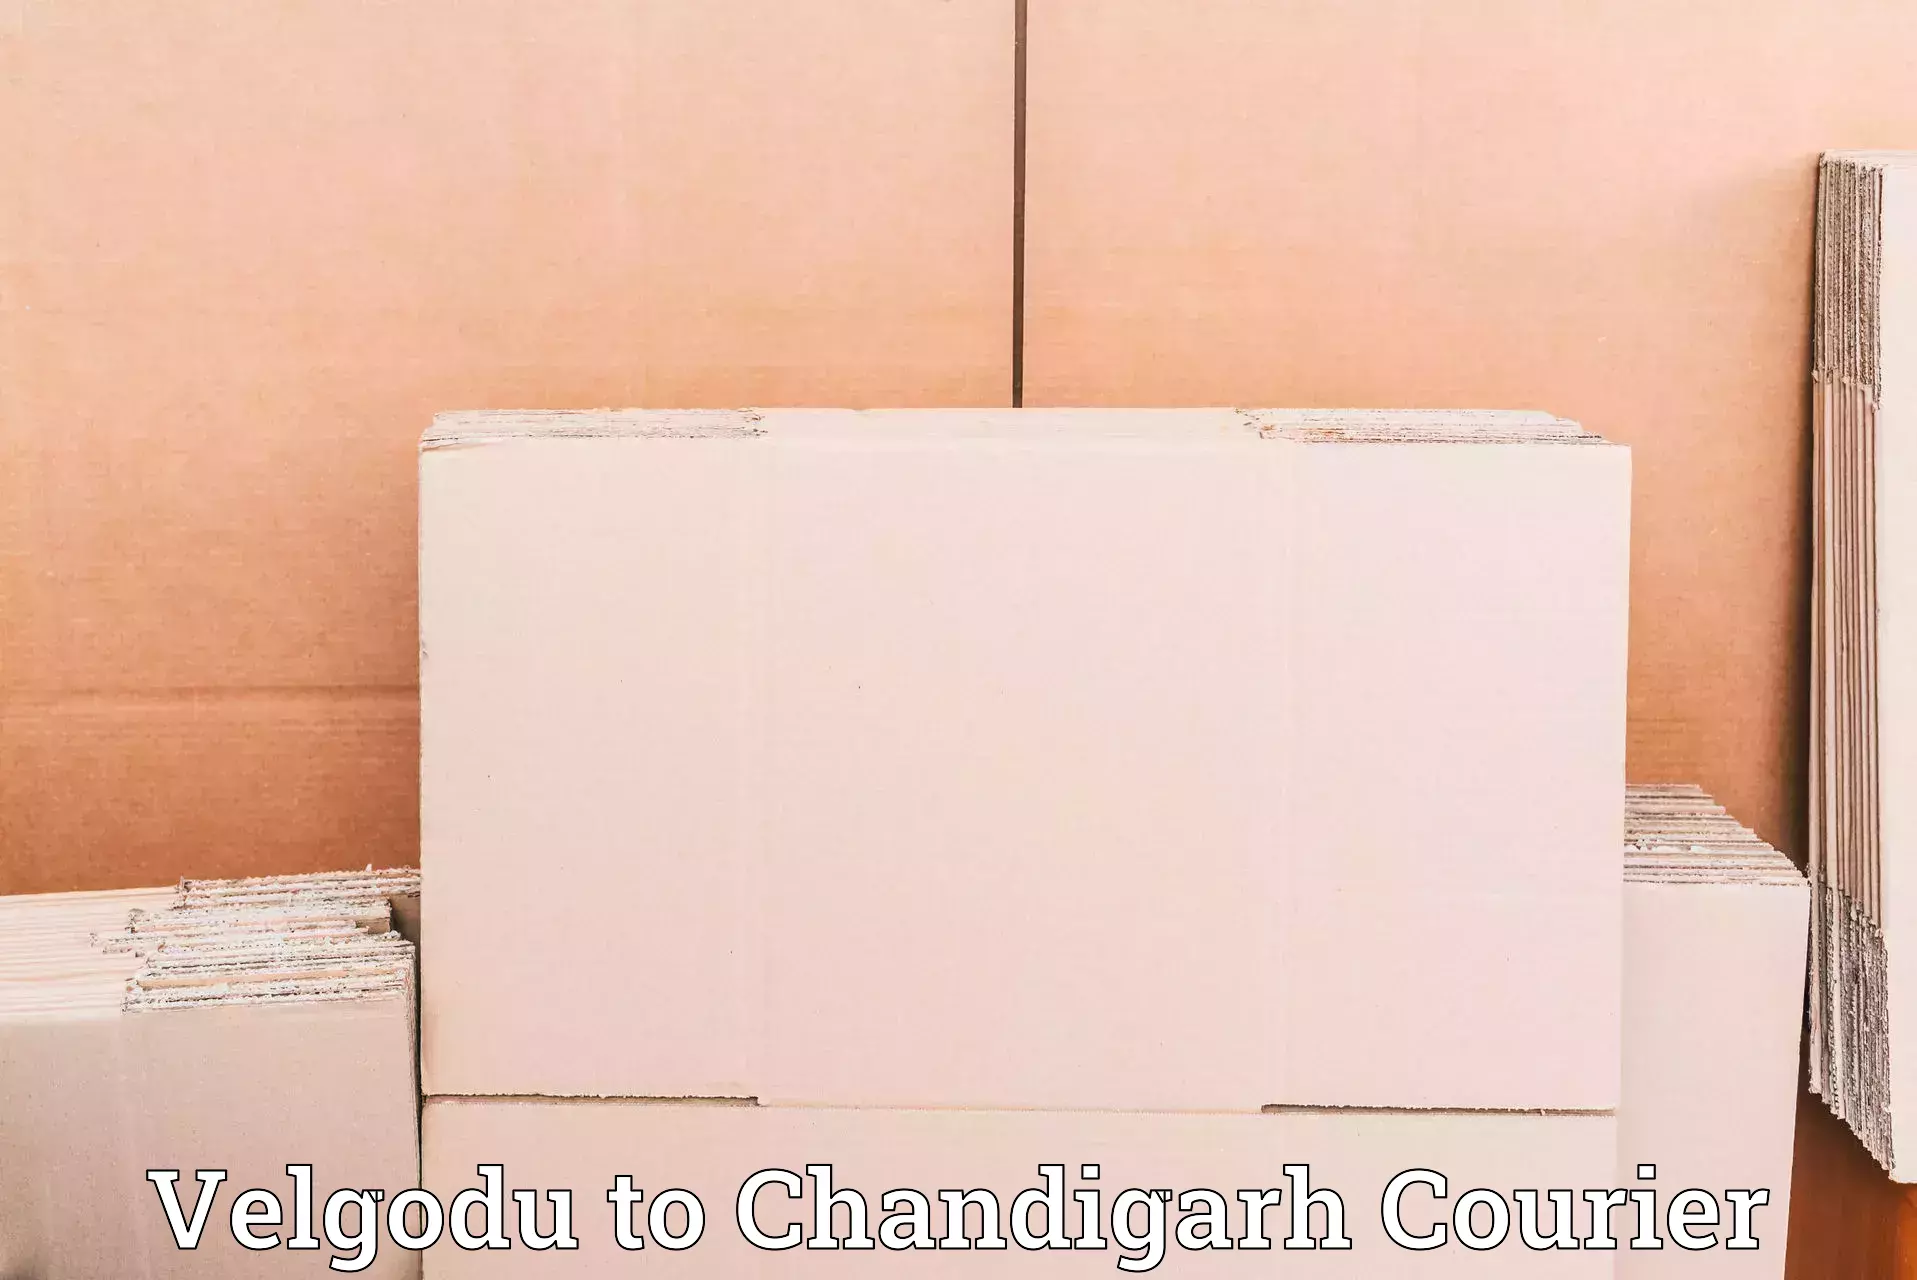 Express delivery capabilities Velgodu to Chandigarh